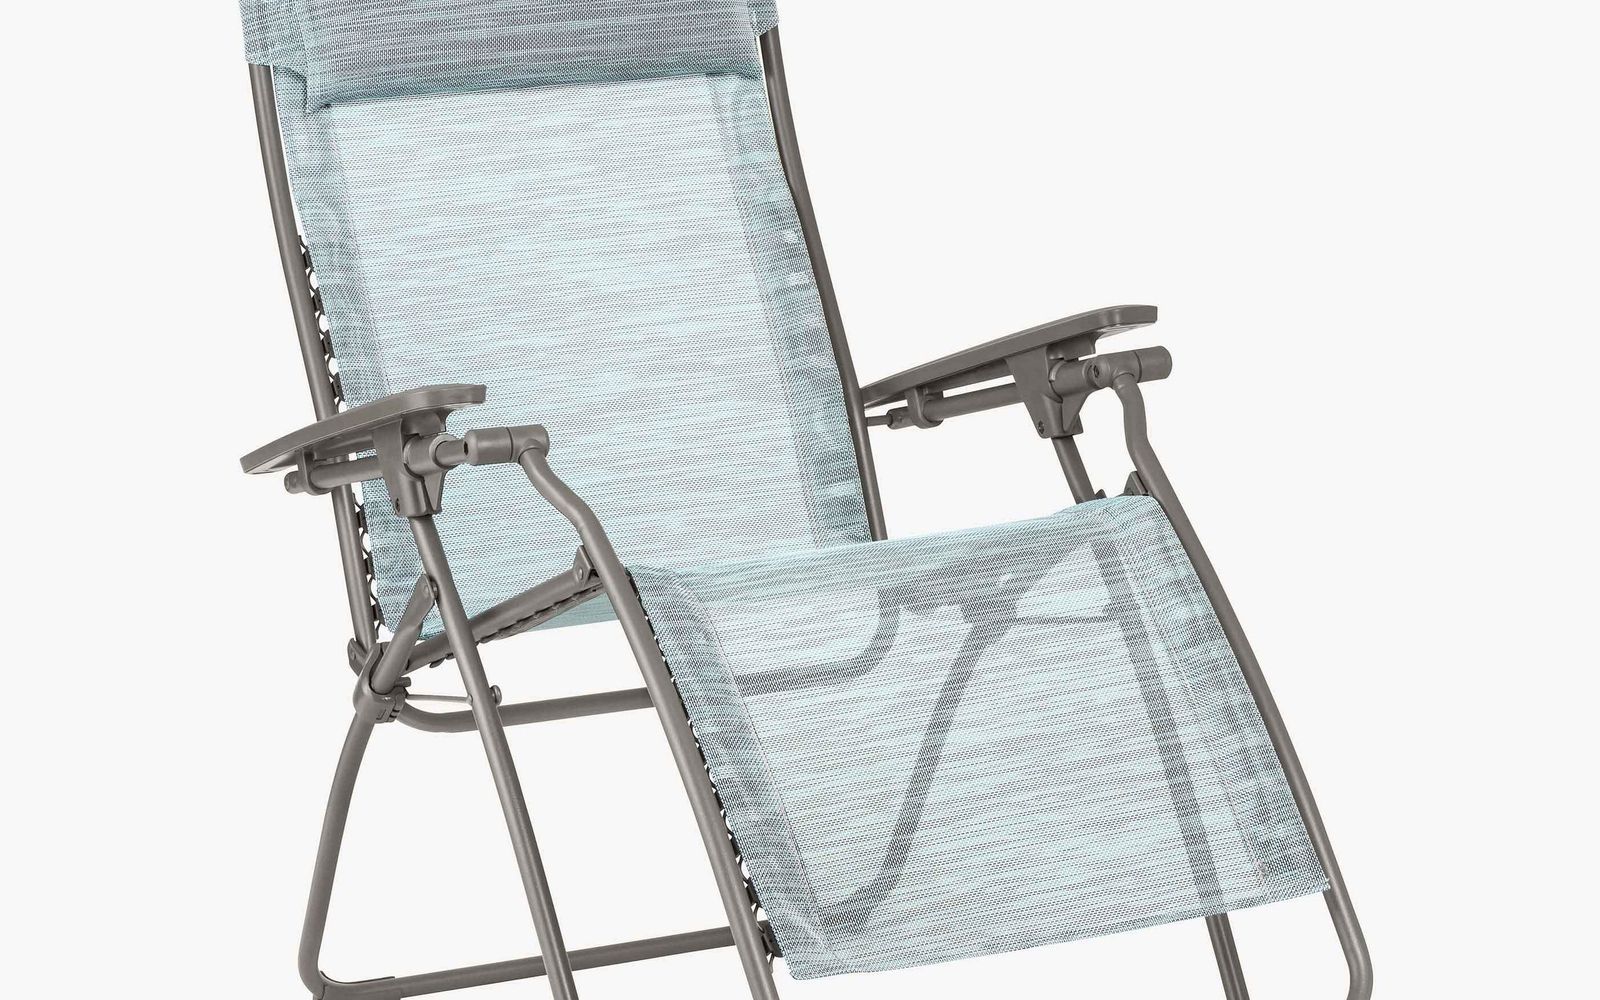 35 Simple Zero gravity chair jd williams for New Ideas